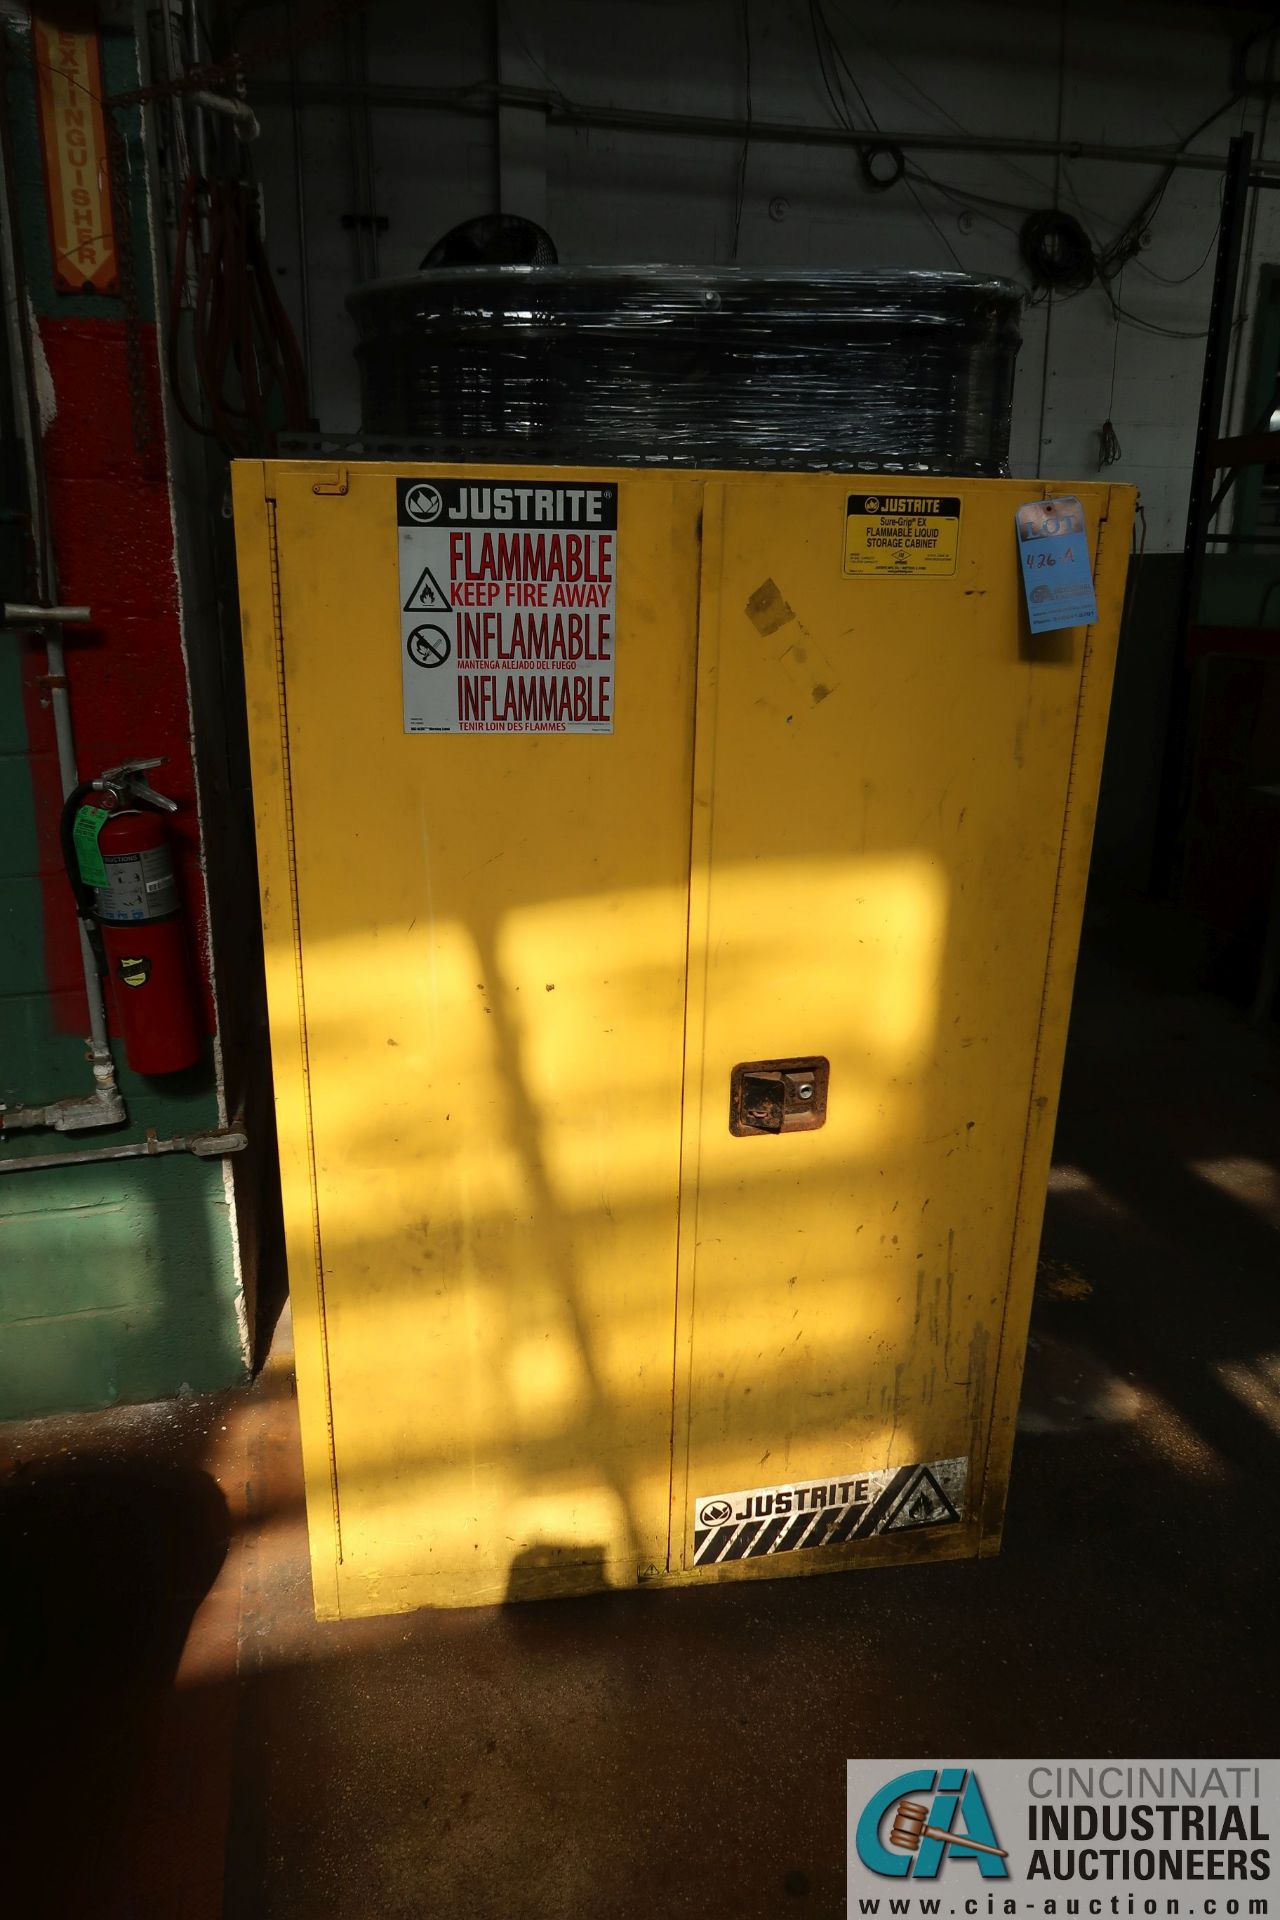 SAFETY CABINET